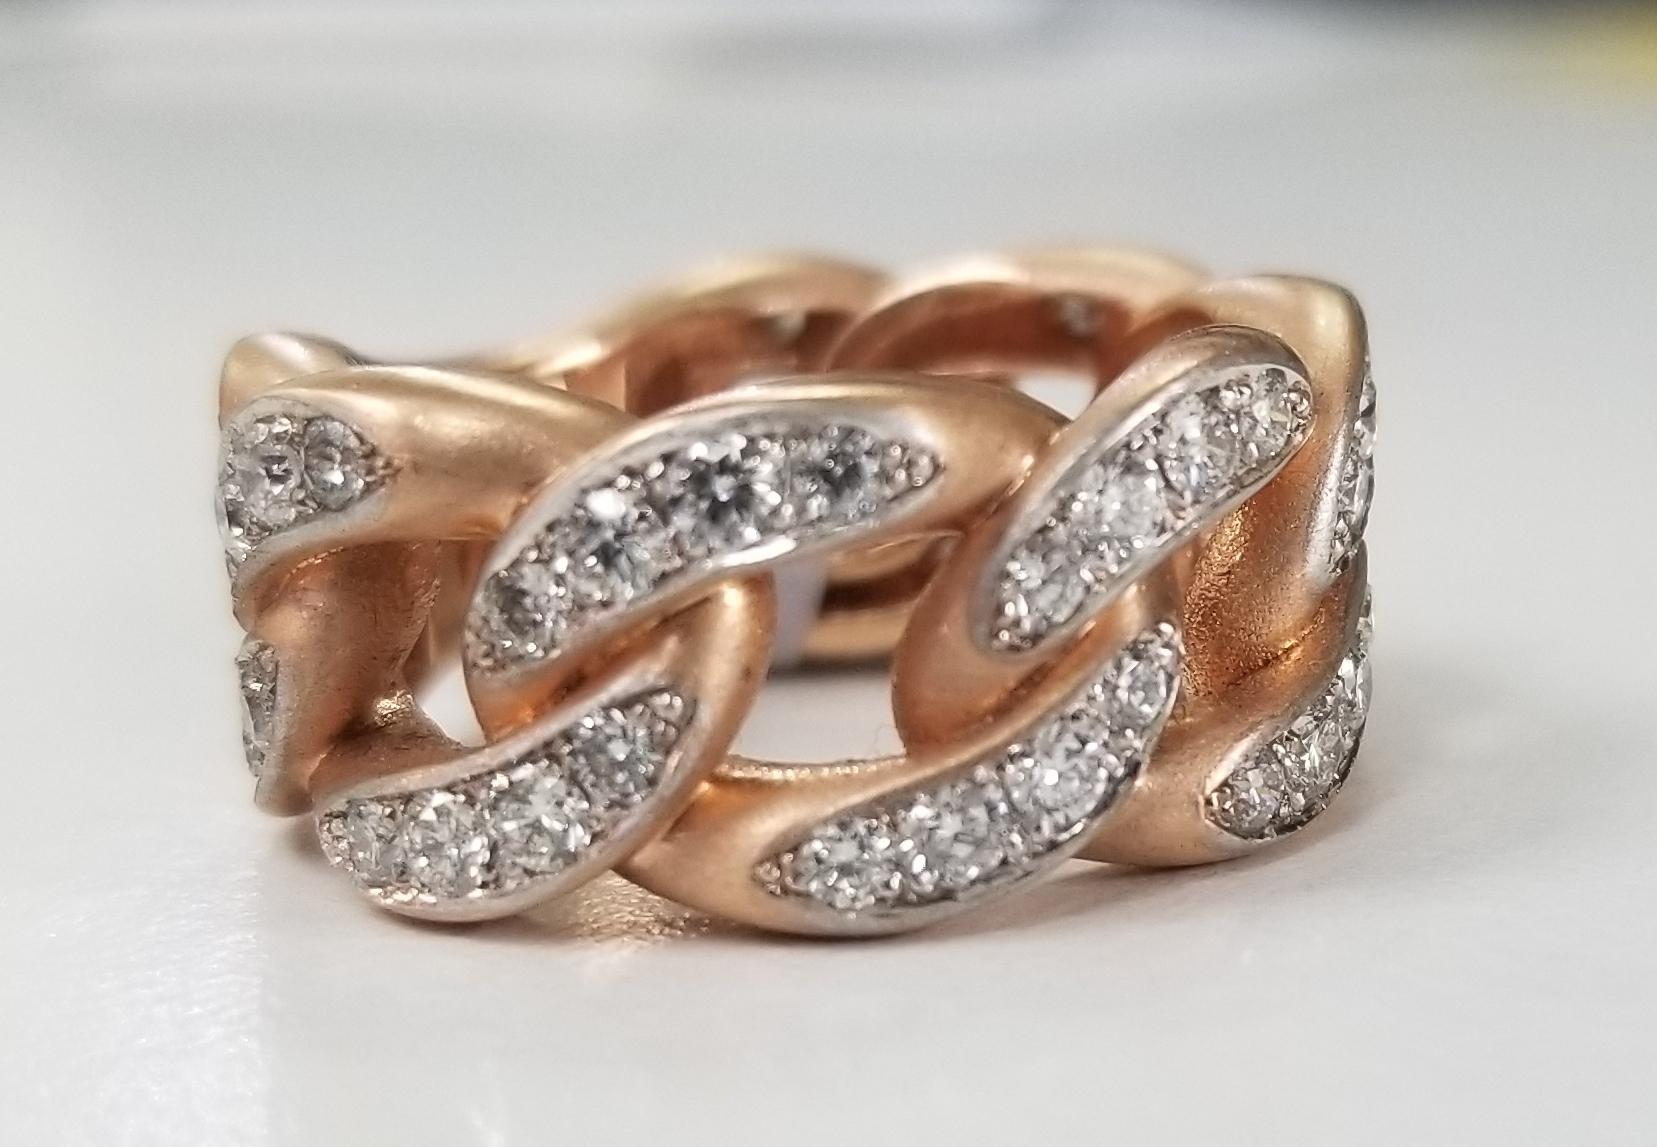 14 karat rose gold diamond pave' link ring, containing 48 round full cut diamonds of very fine quality weighing 1.32cts. ring size is 7 and is 11.5mm wide.